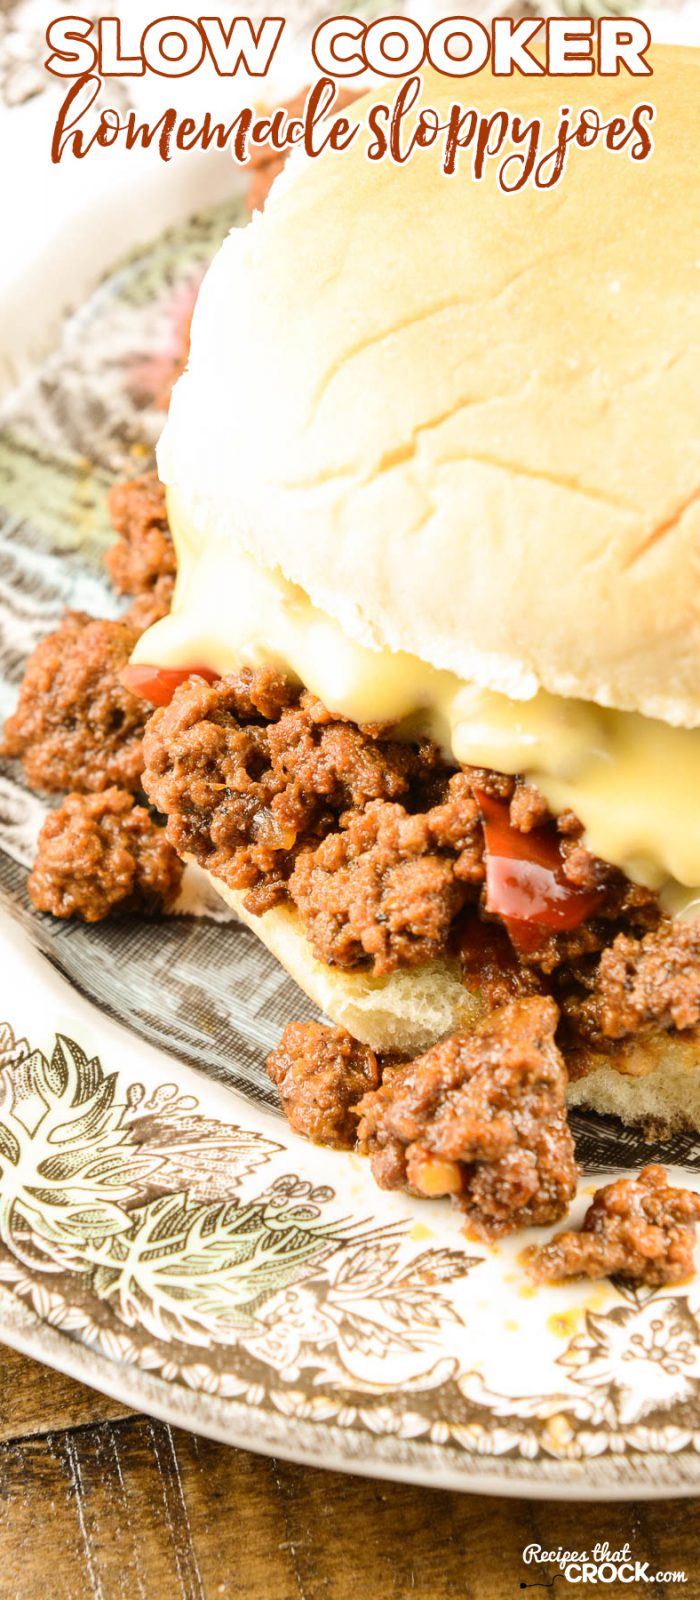 Are you looking for a great Homemade Sloppy Joes slow cooker recipe? We just love these super easy Homemade Sloppy Joes (Slow Cooker) for weeknight family dinner or great for feeding a crowd!